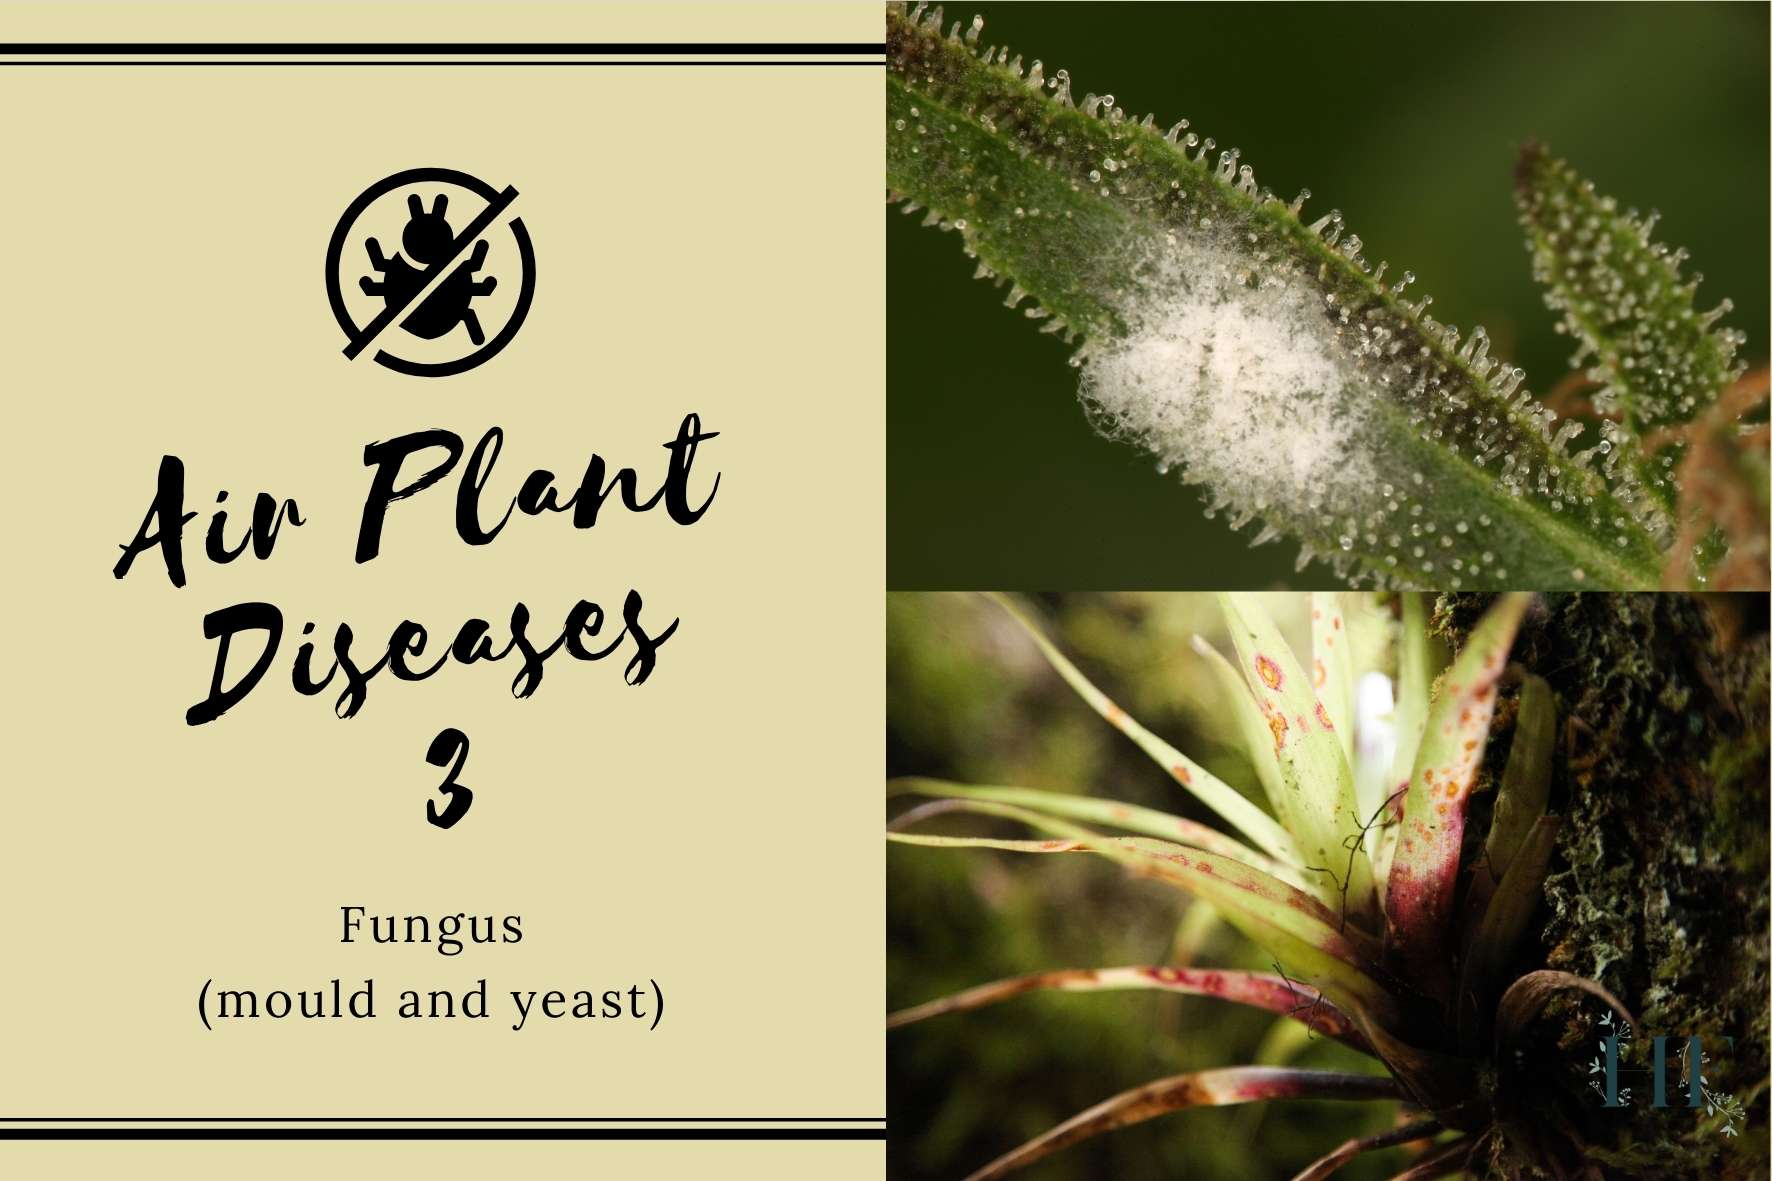 air-plant-diseases-fungus-mould-and-yeast